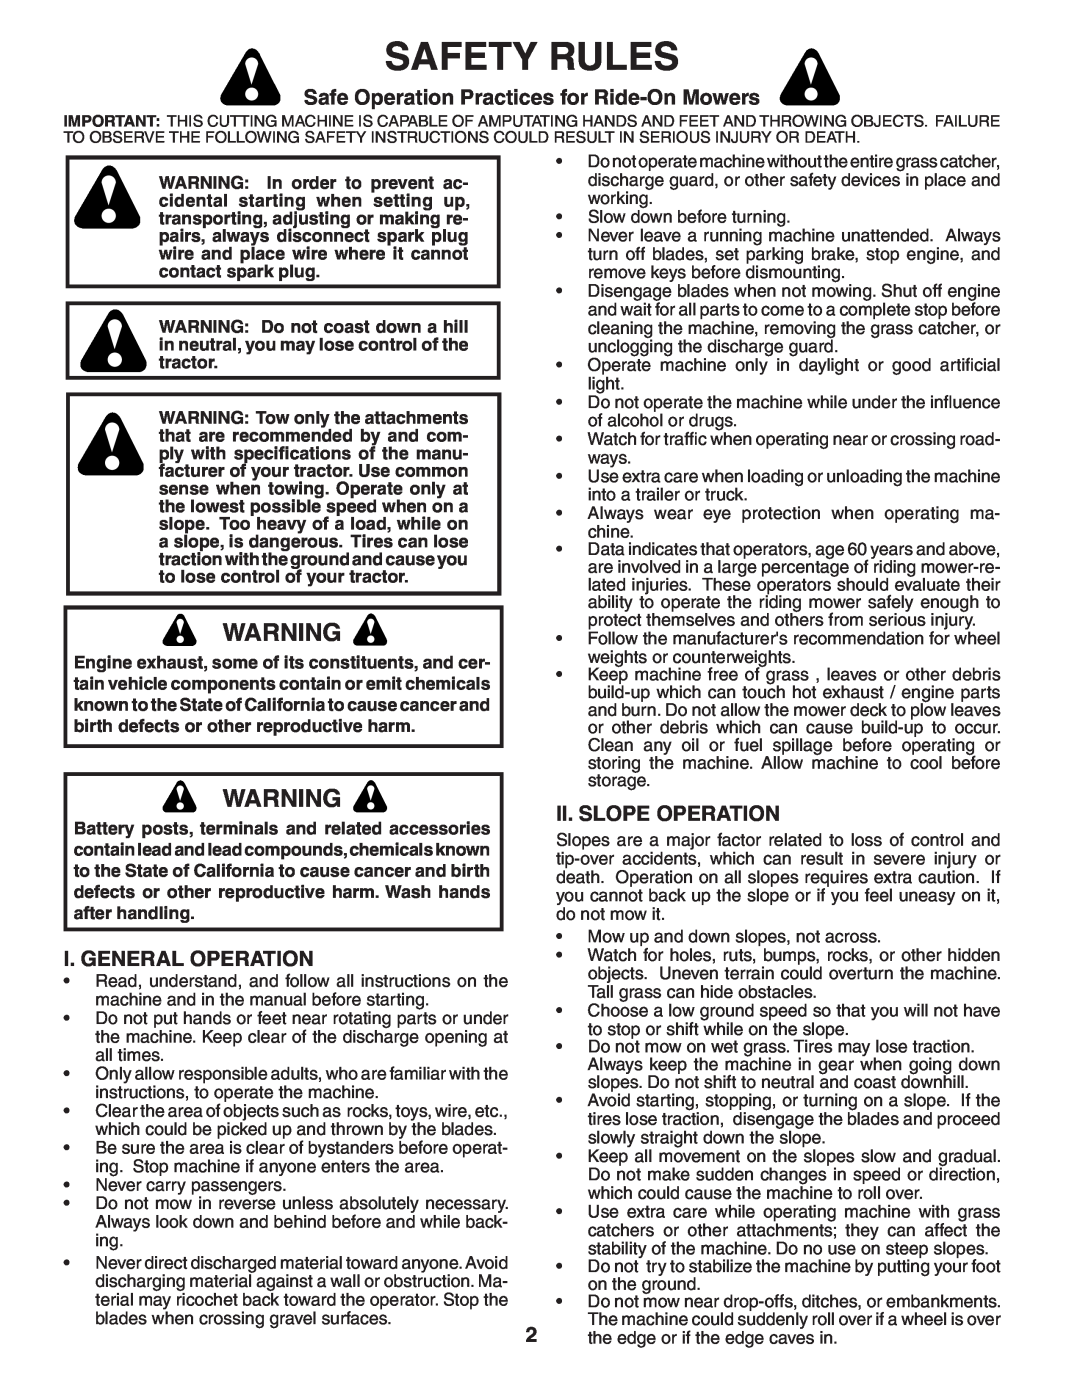 Poulan 194604 manual Safety Rules, Safe Operation Practices for Ride-On Mowers, I. General Operation, Ii. Slope Operation 